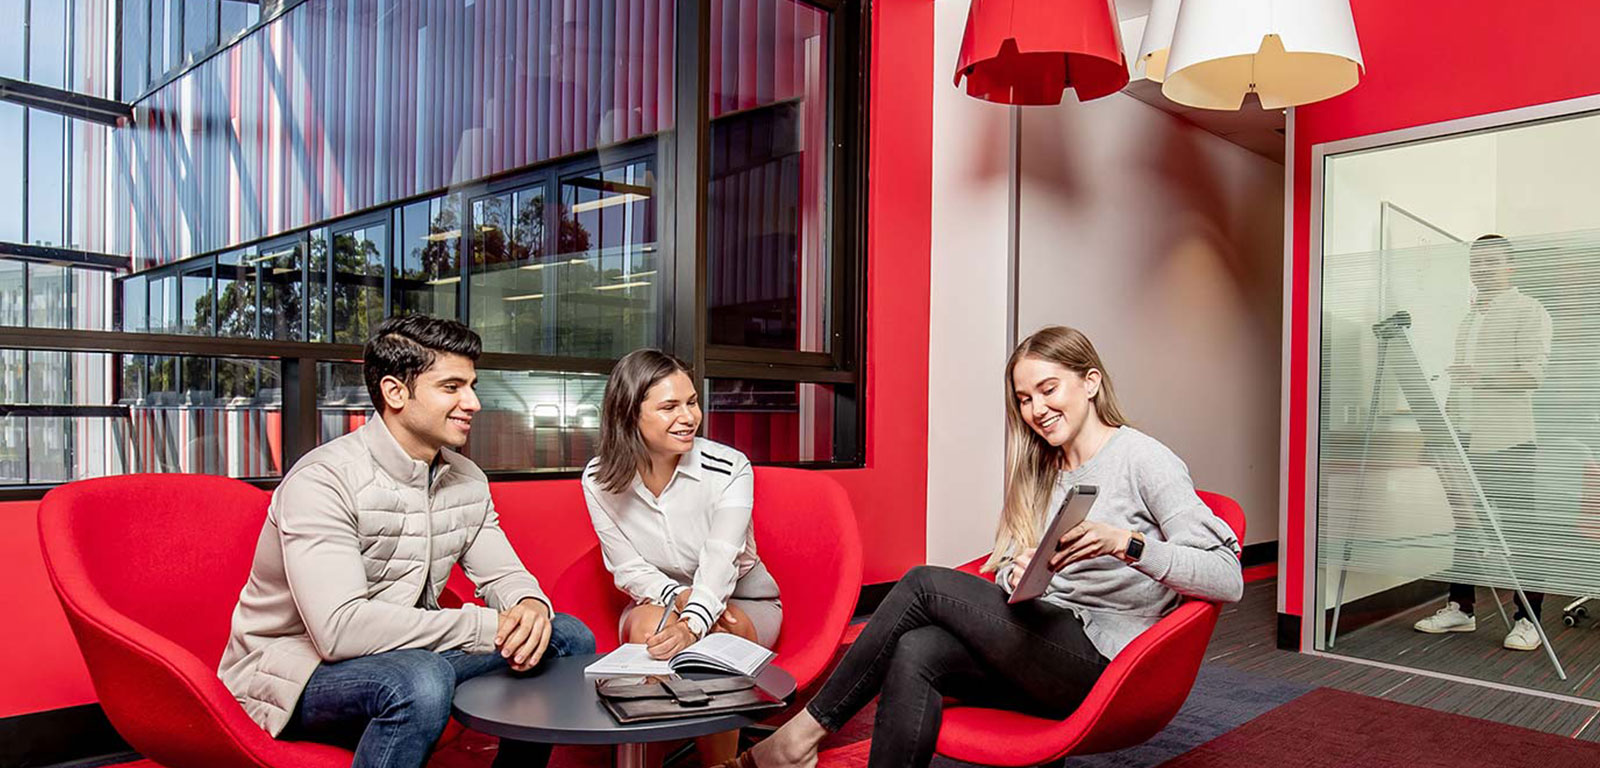 Griffith University - South Bank Campus Background Image